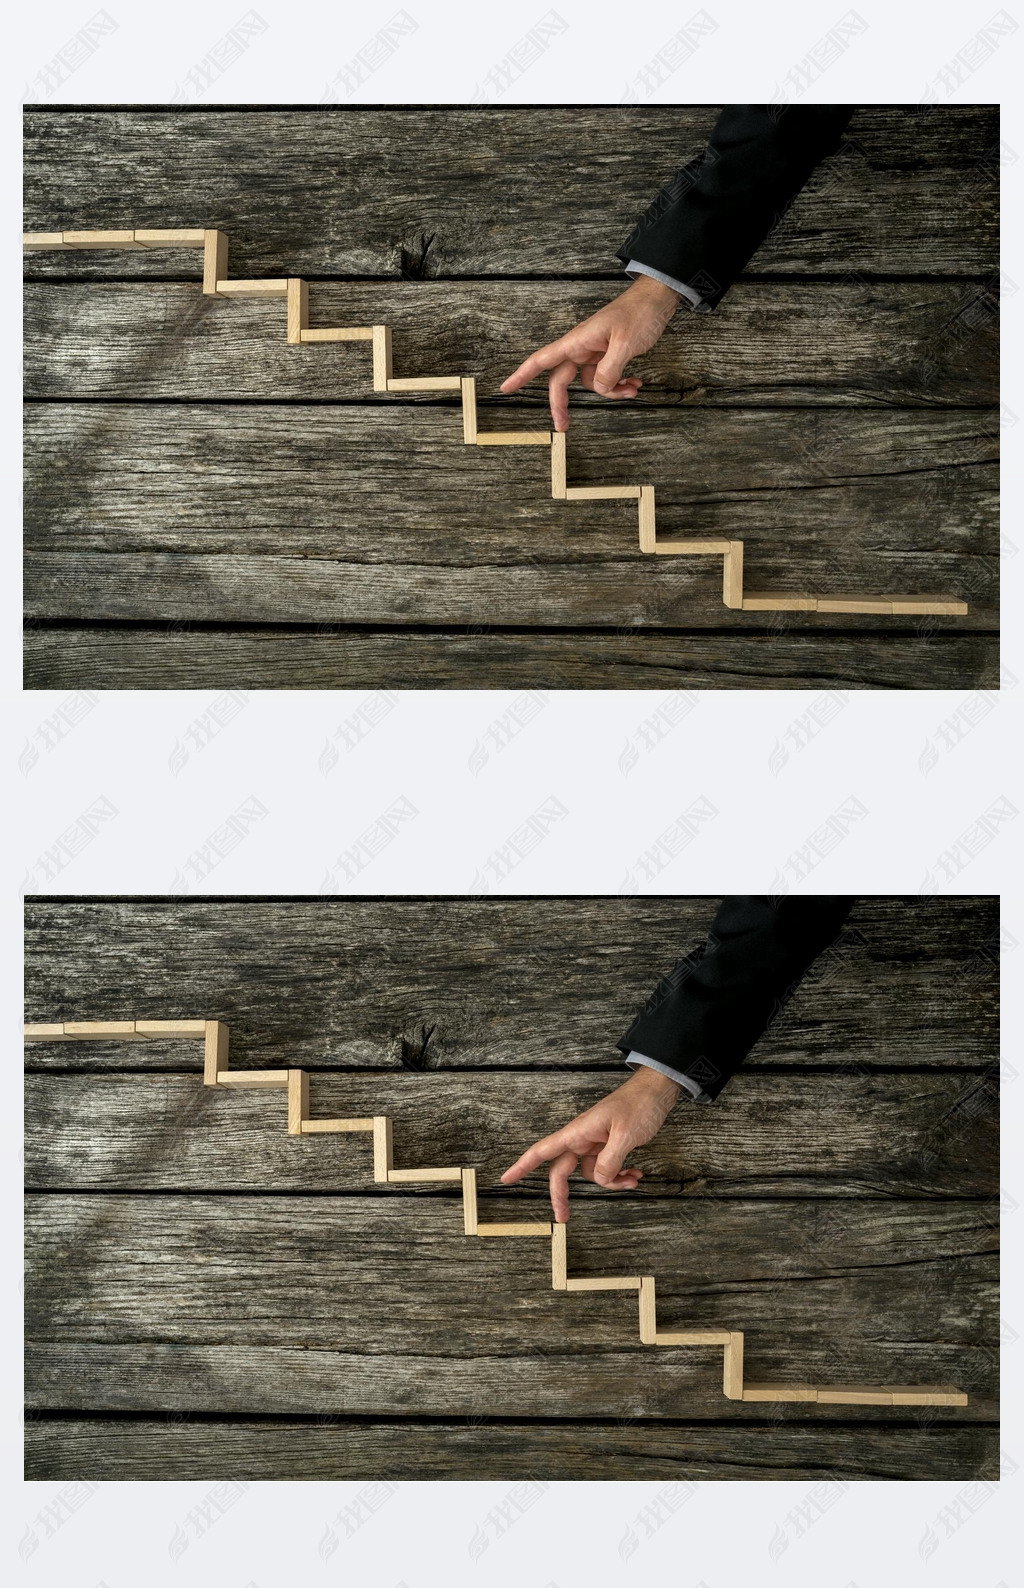 Businesan or student walking his fingers up wooden steps